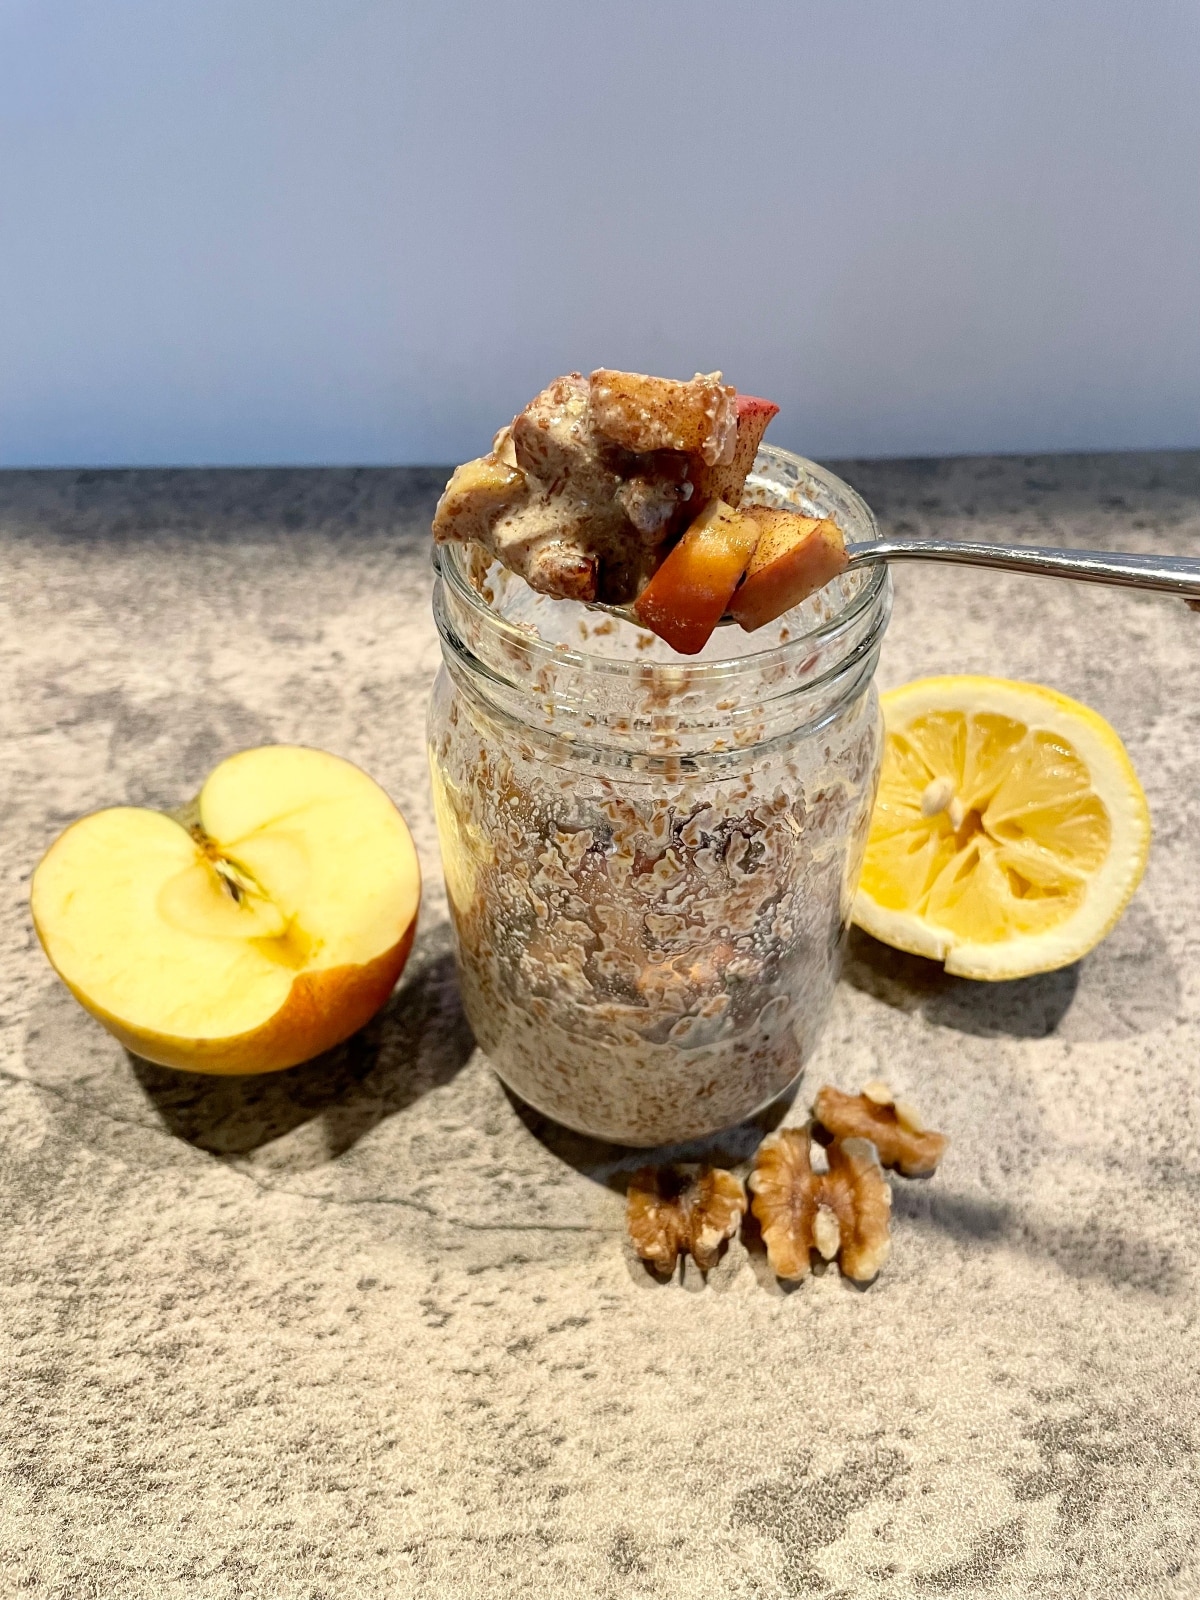 flaxseed pudding with apples, cinnamon, and walnuts in a mason jar atop a gray countertop.  Half a lemon, half an apple, and 3 walnuts halves are next to the jar.